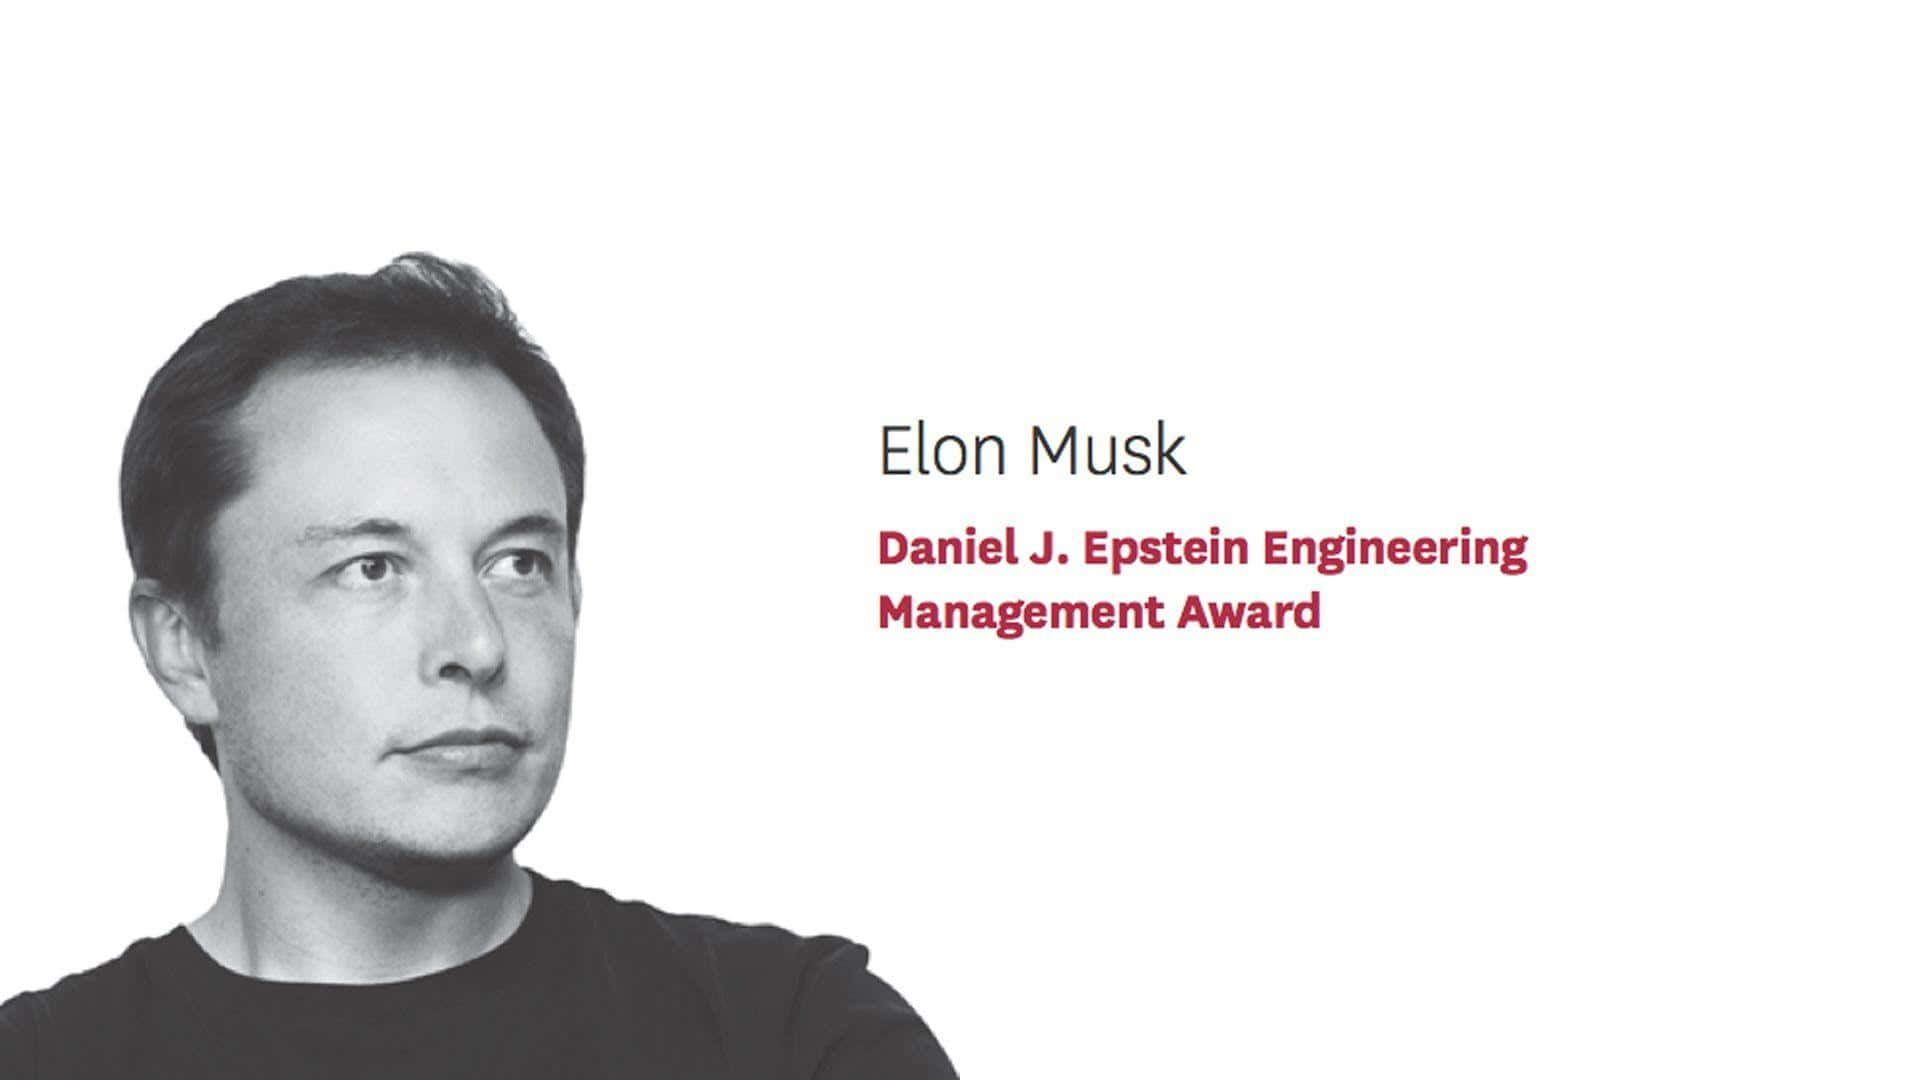 "The Visionary of the 21st Century, Elon Musk"